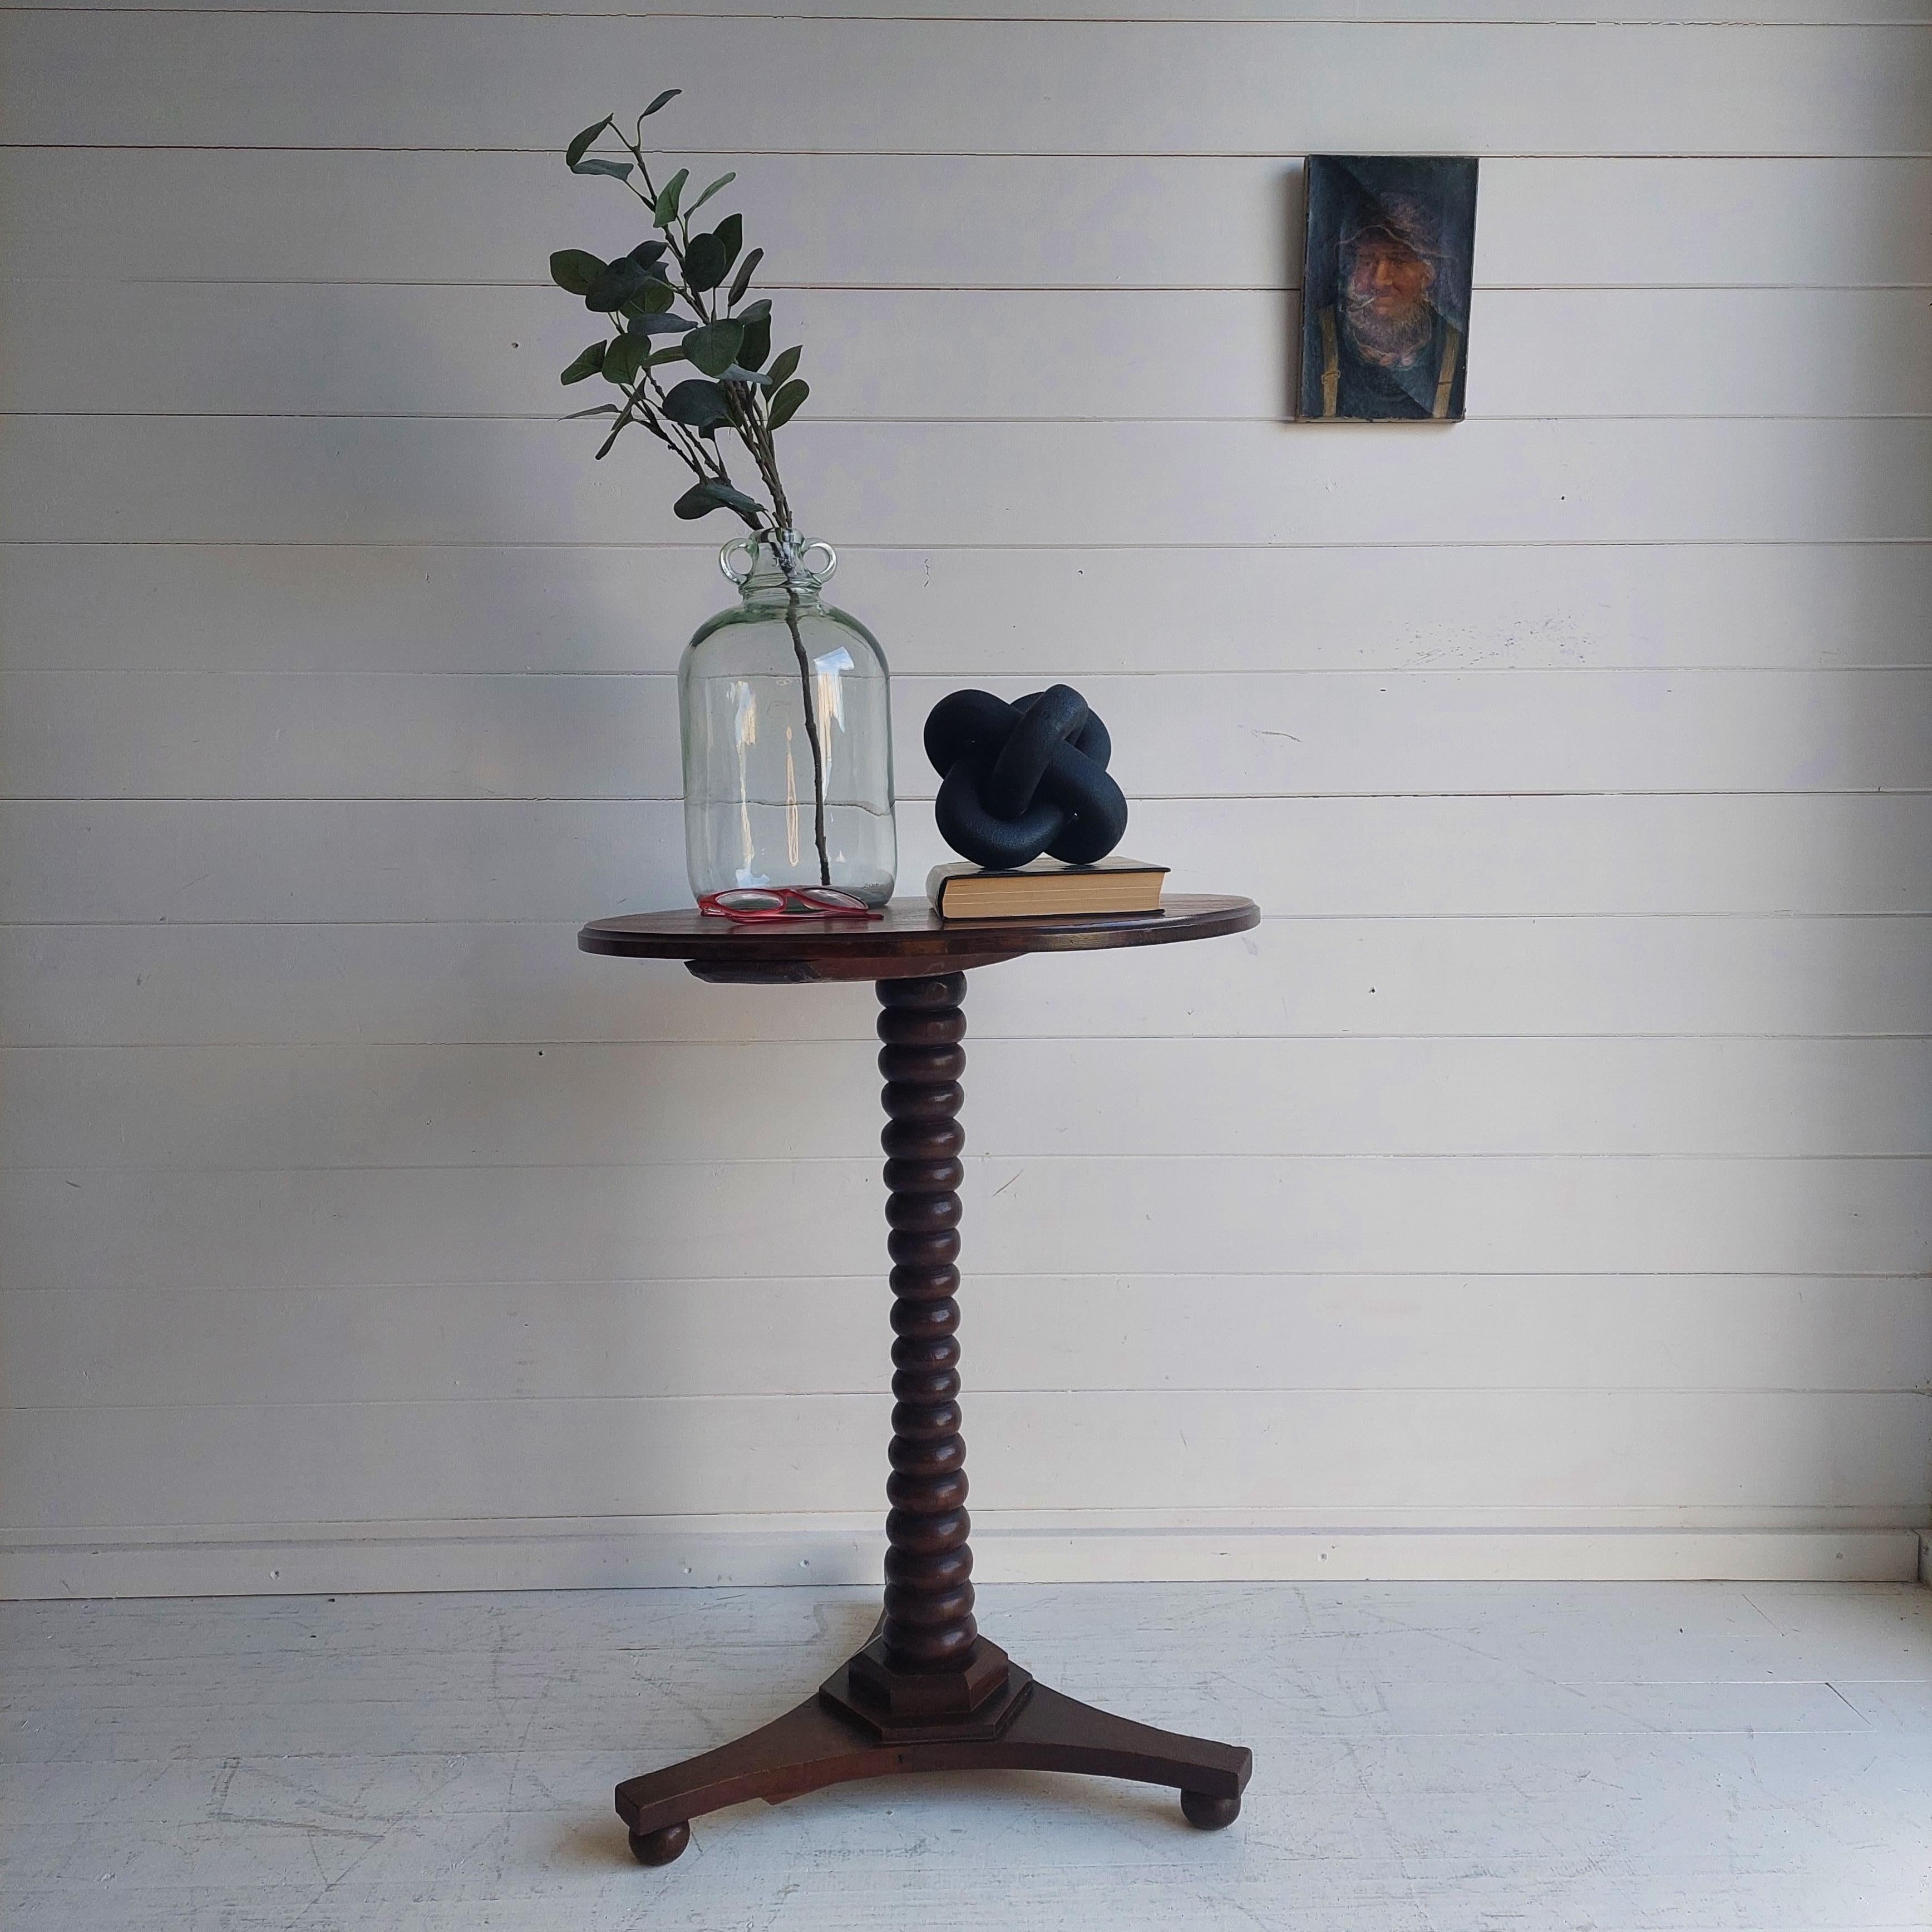 A Lovely English Antique wine or lamp table, Georgian Period circa 1800s.
A gorgeous rare antique bobbin-turned oak tripod wine table in lovely condition.

Features:
The table made from Tiguer Oak 
Circular top with lovely grain
Pedestal